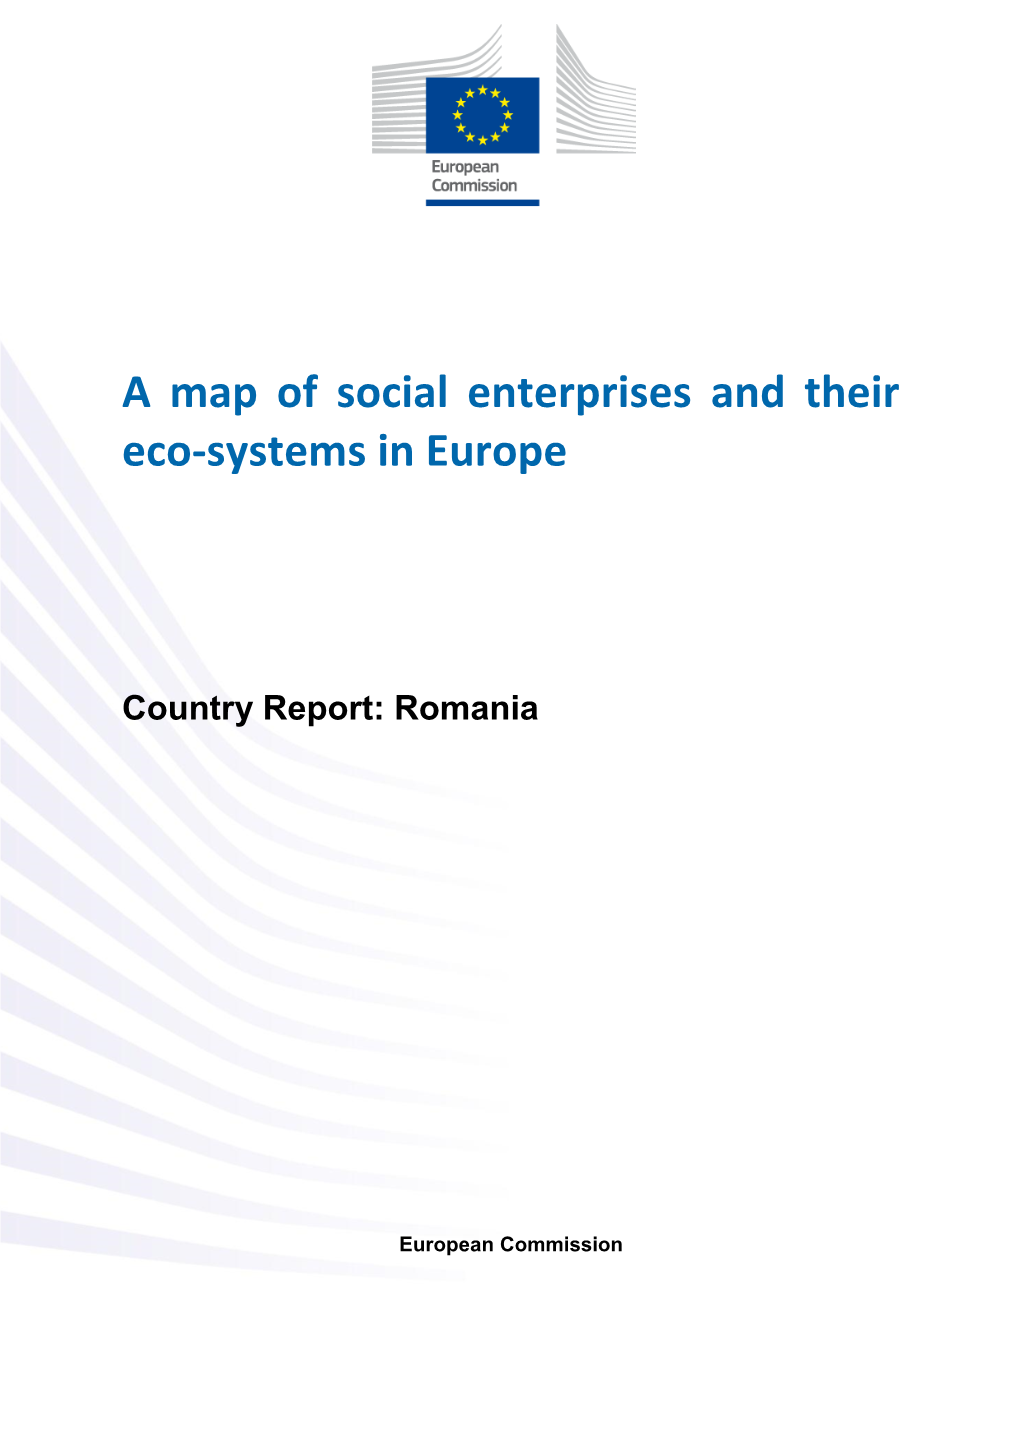 A Map of Social Enterprises and Their Eco-Systems in Europe